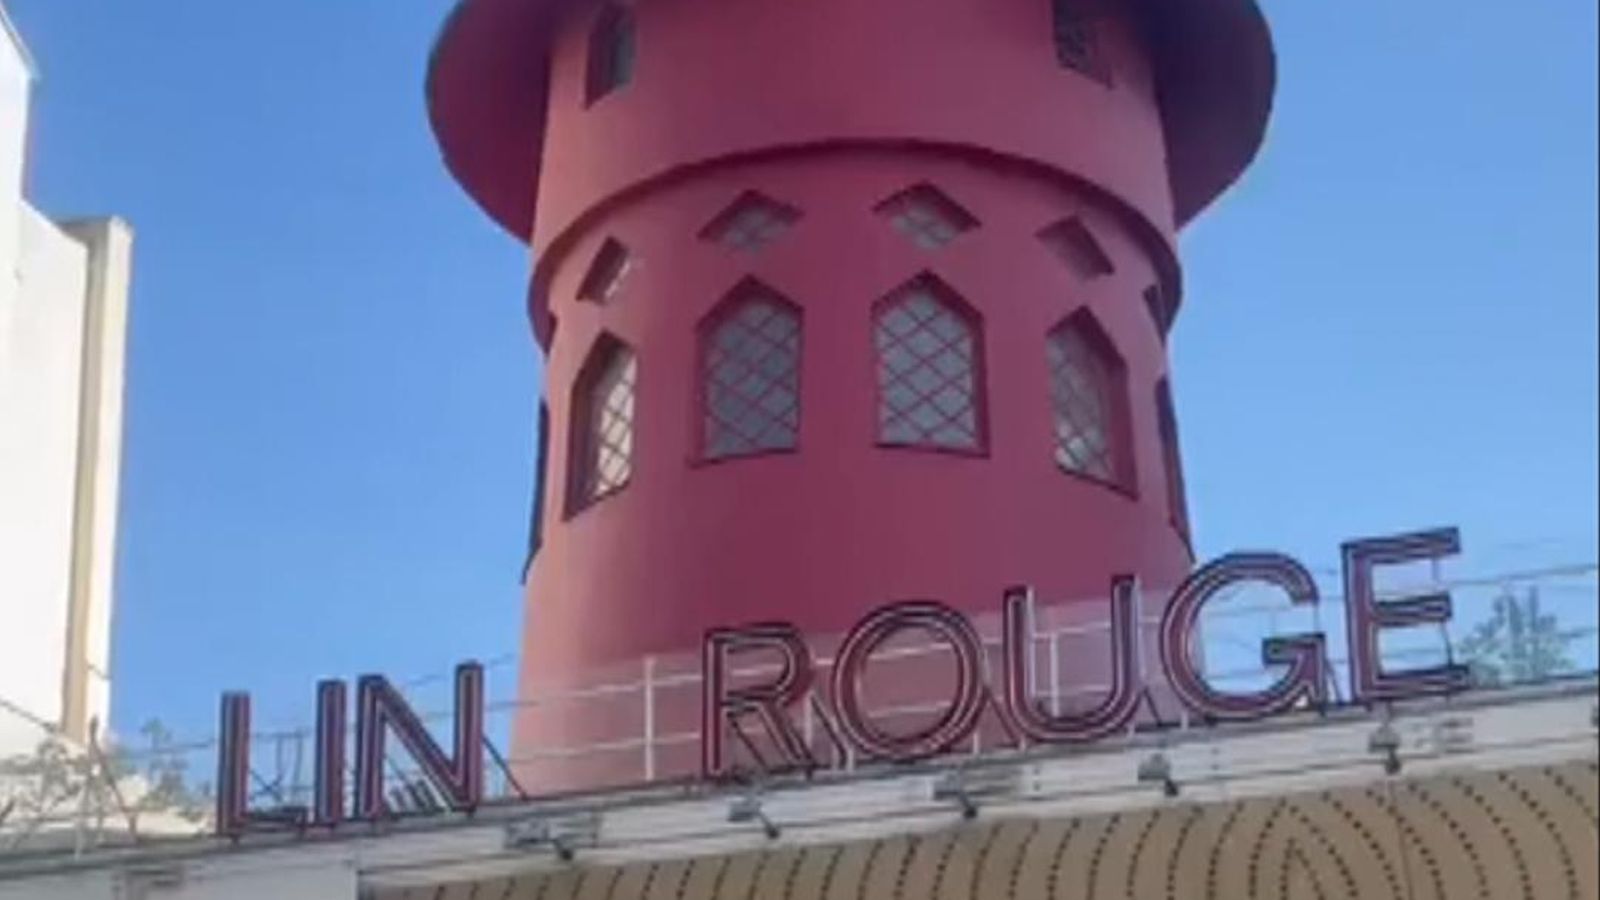 The Iconic Moulin Rouge Loses Its Sails Overnight